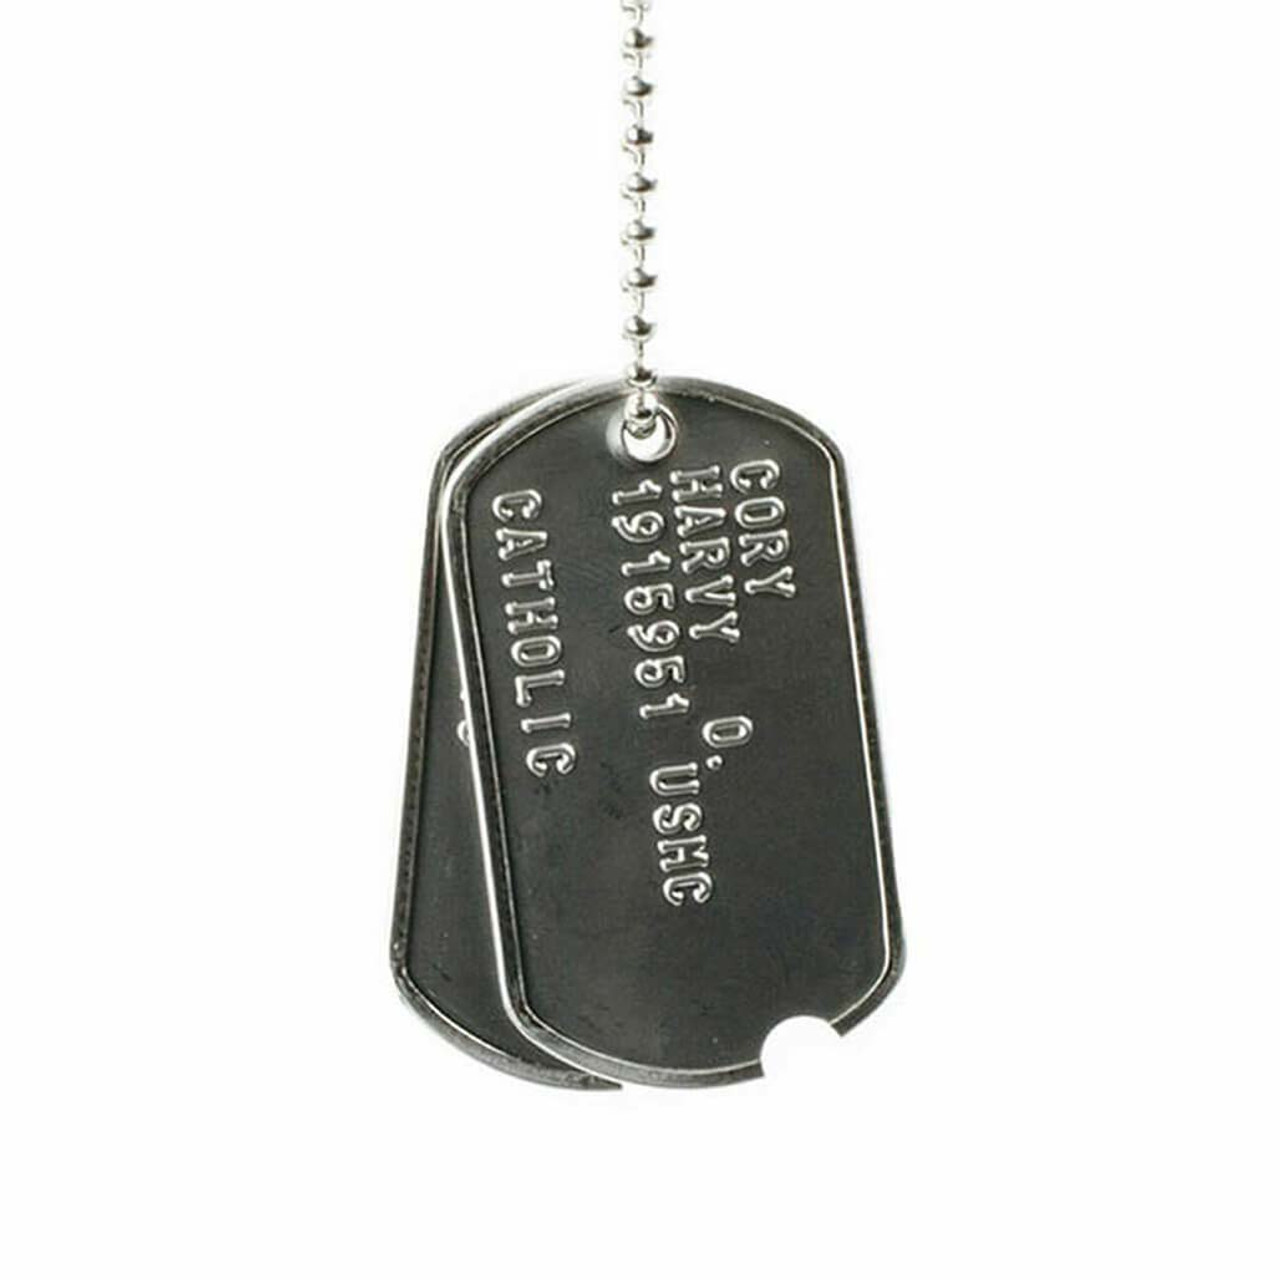 U.S. Military Dog Tags with Notch (WWII-Early Vietnam)